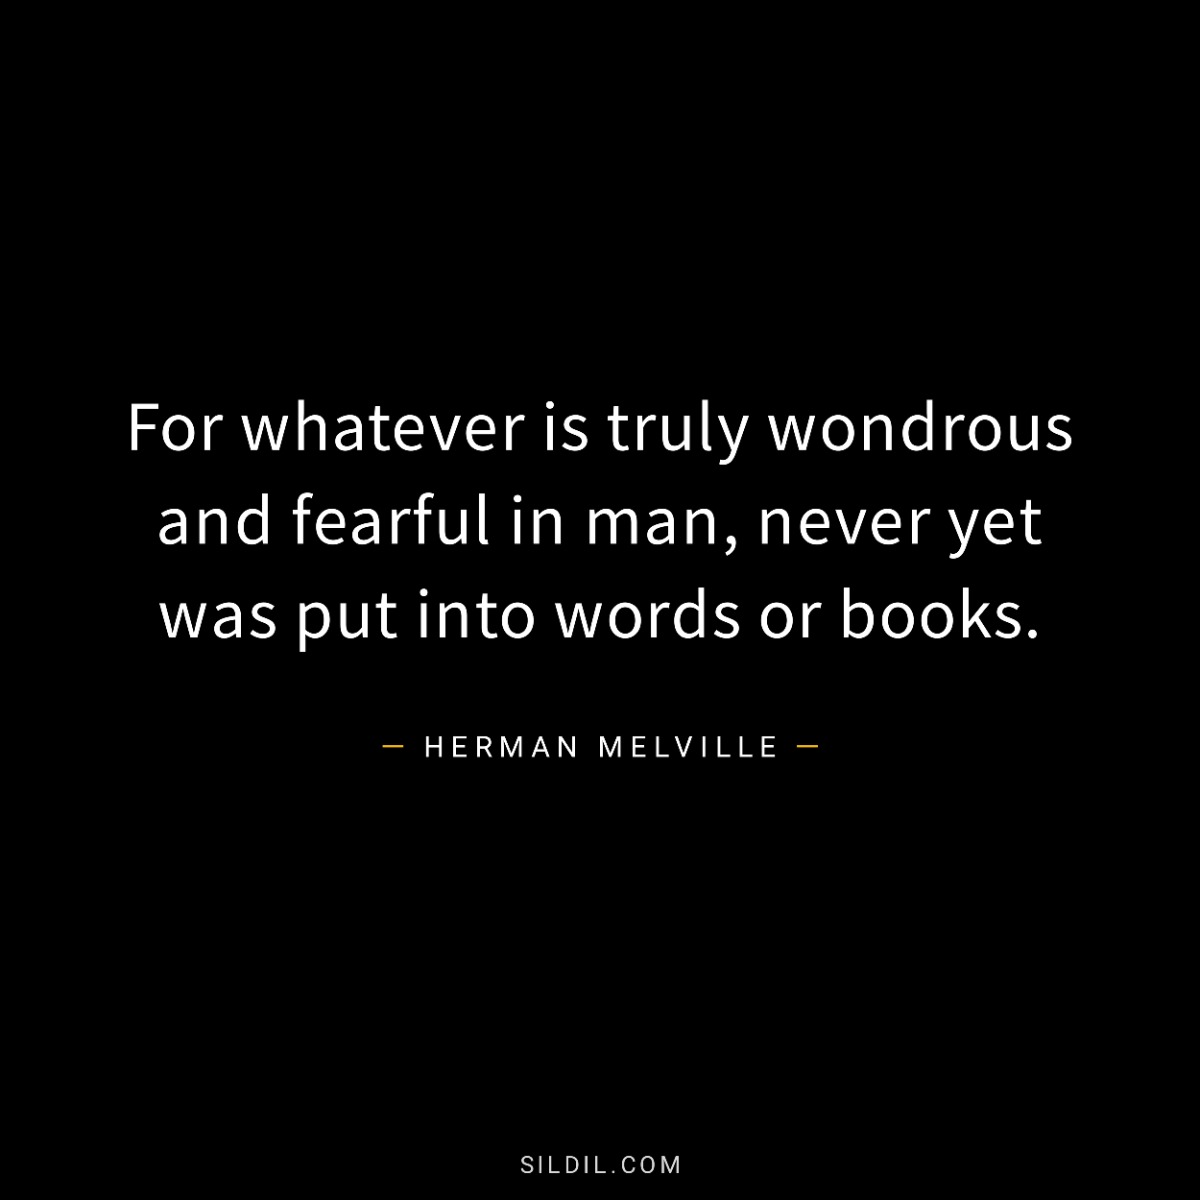 For whatever is truly wondrous and fearful in man, never yet was put into words or books.